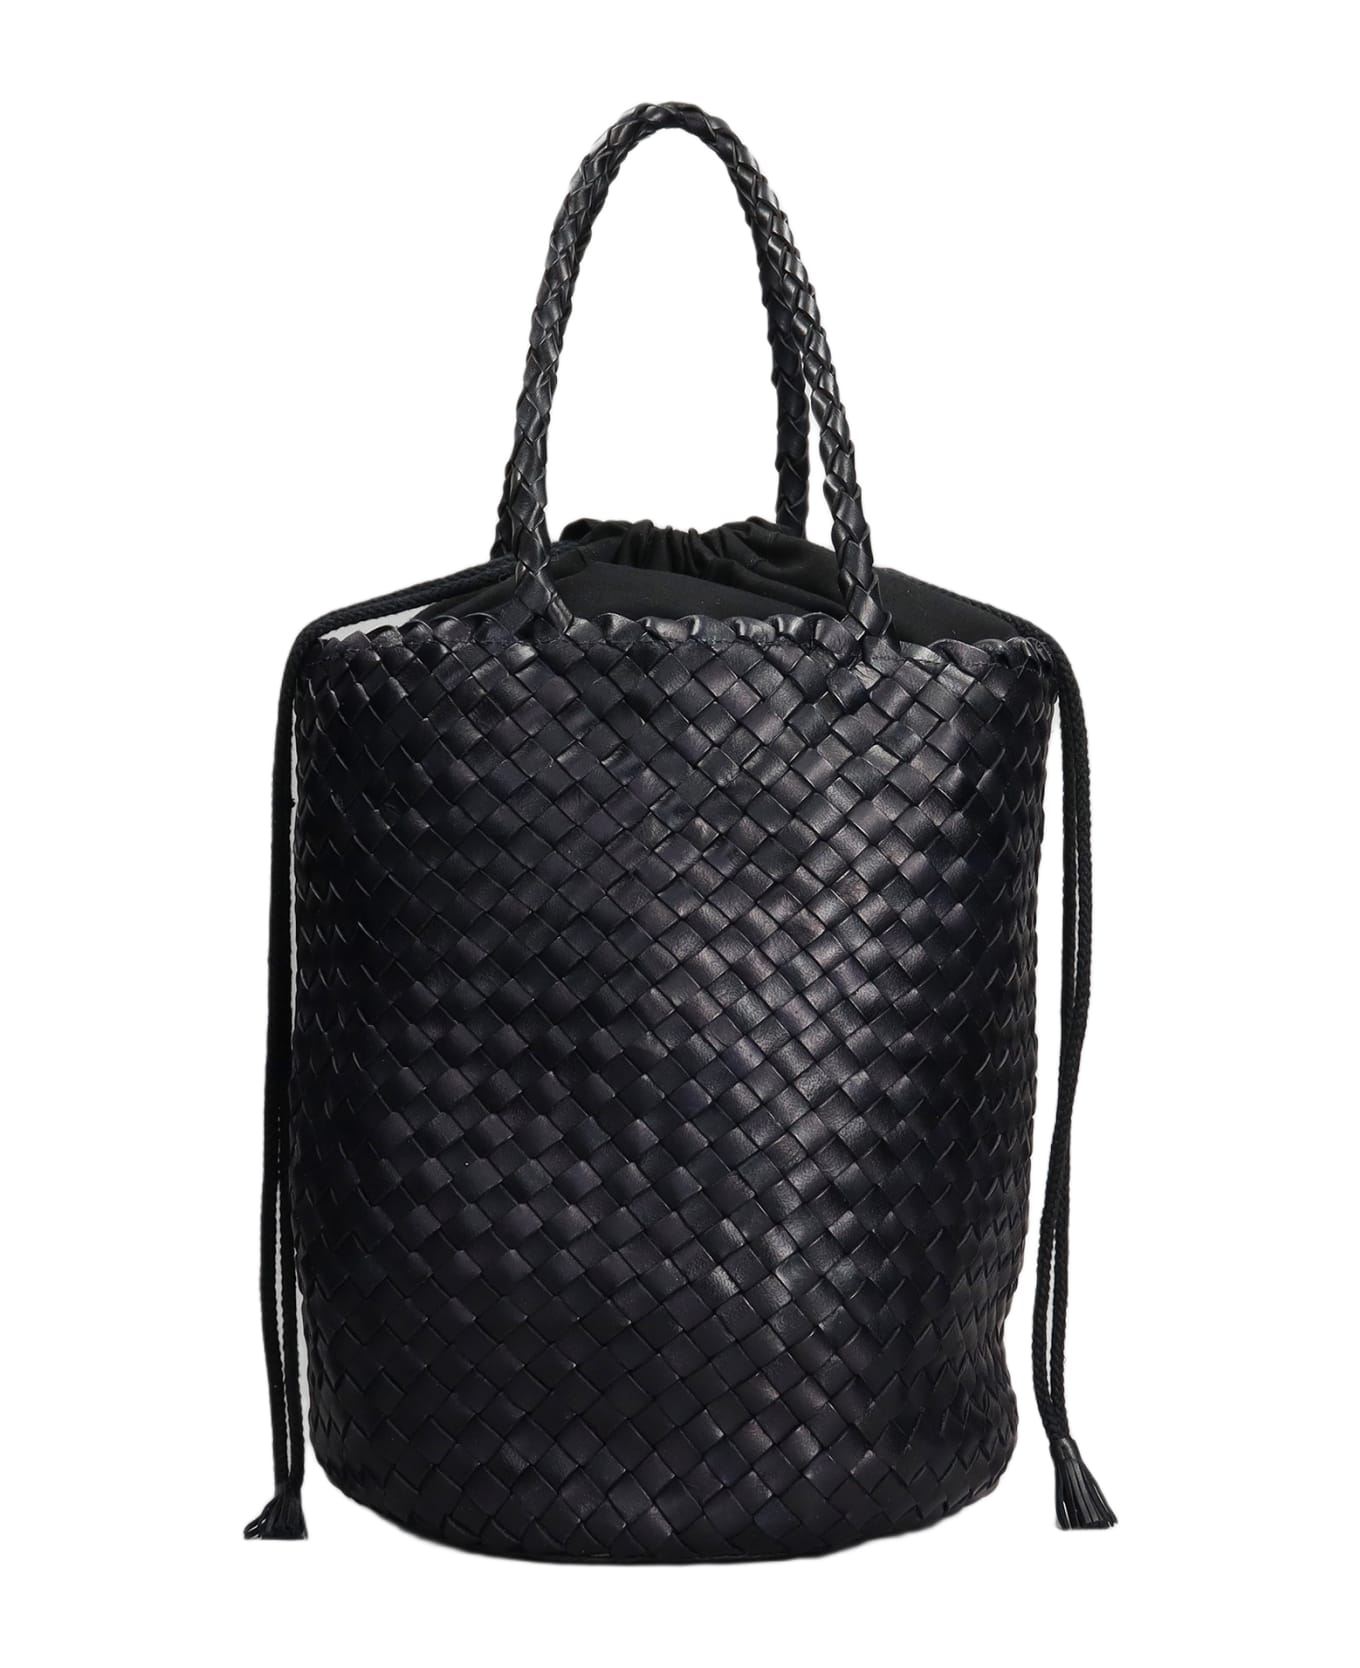 Dragon Diffusion Jacky Bucket Hand Bag In Black Leather - black トートバッグ